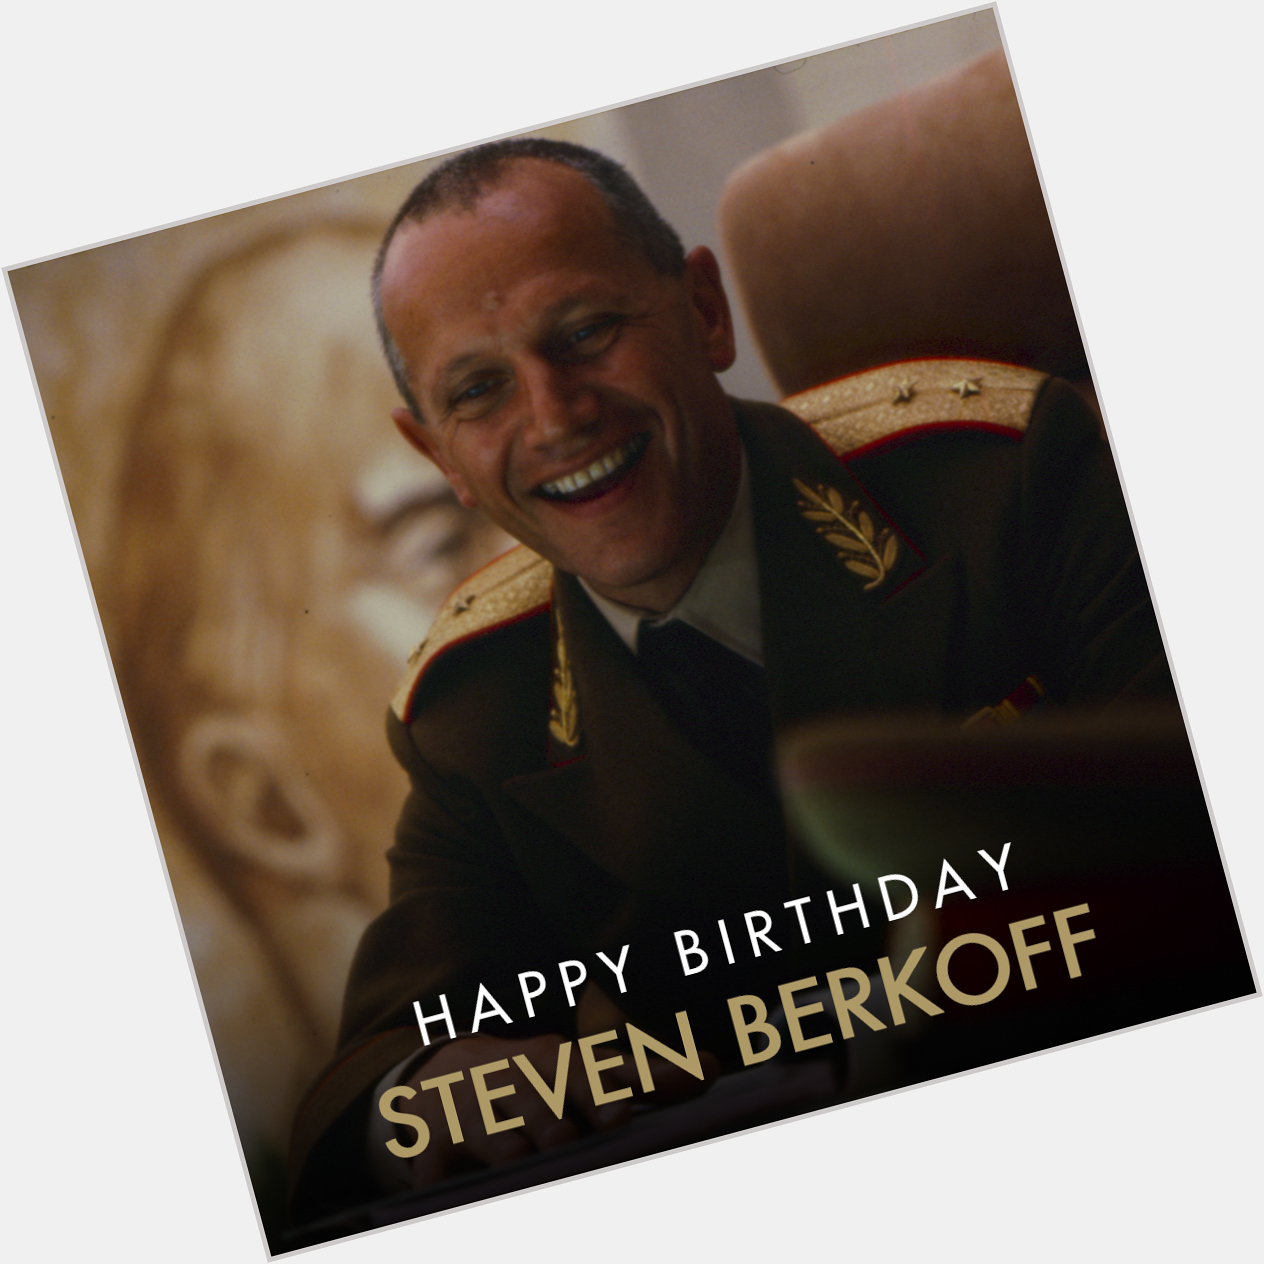 Follow that car! Happy Birthday to Steven Berkoff, who played General Orlov in OCTOPUSSY. 